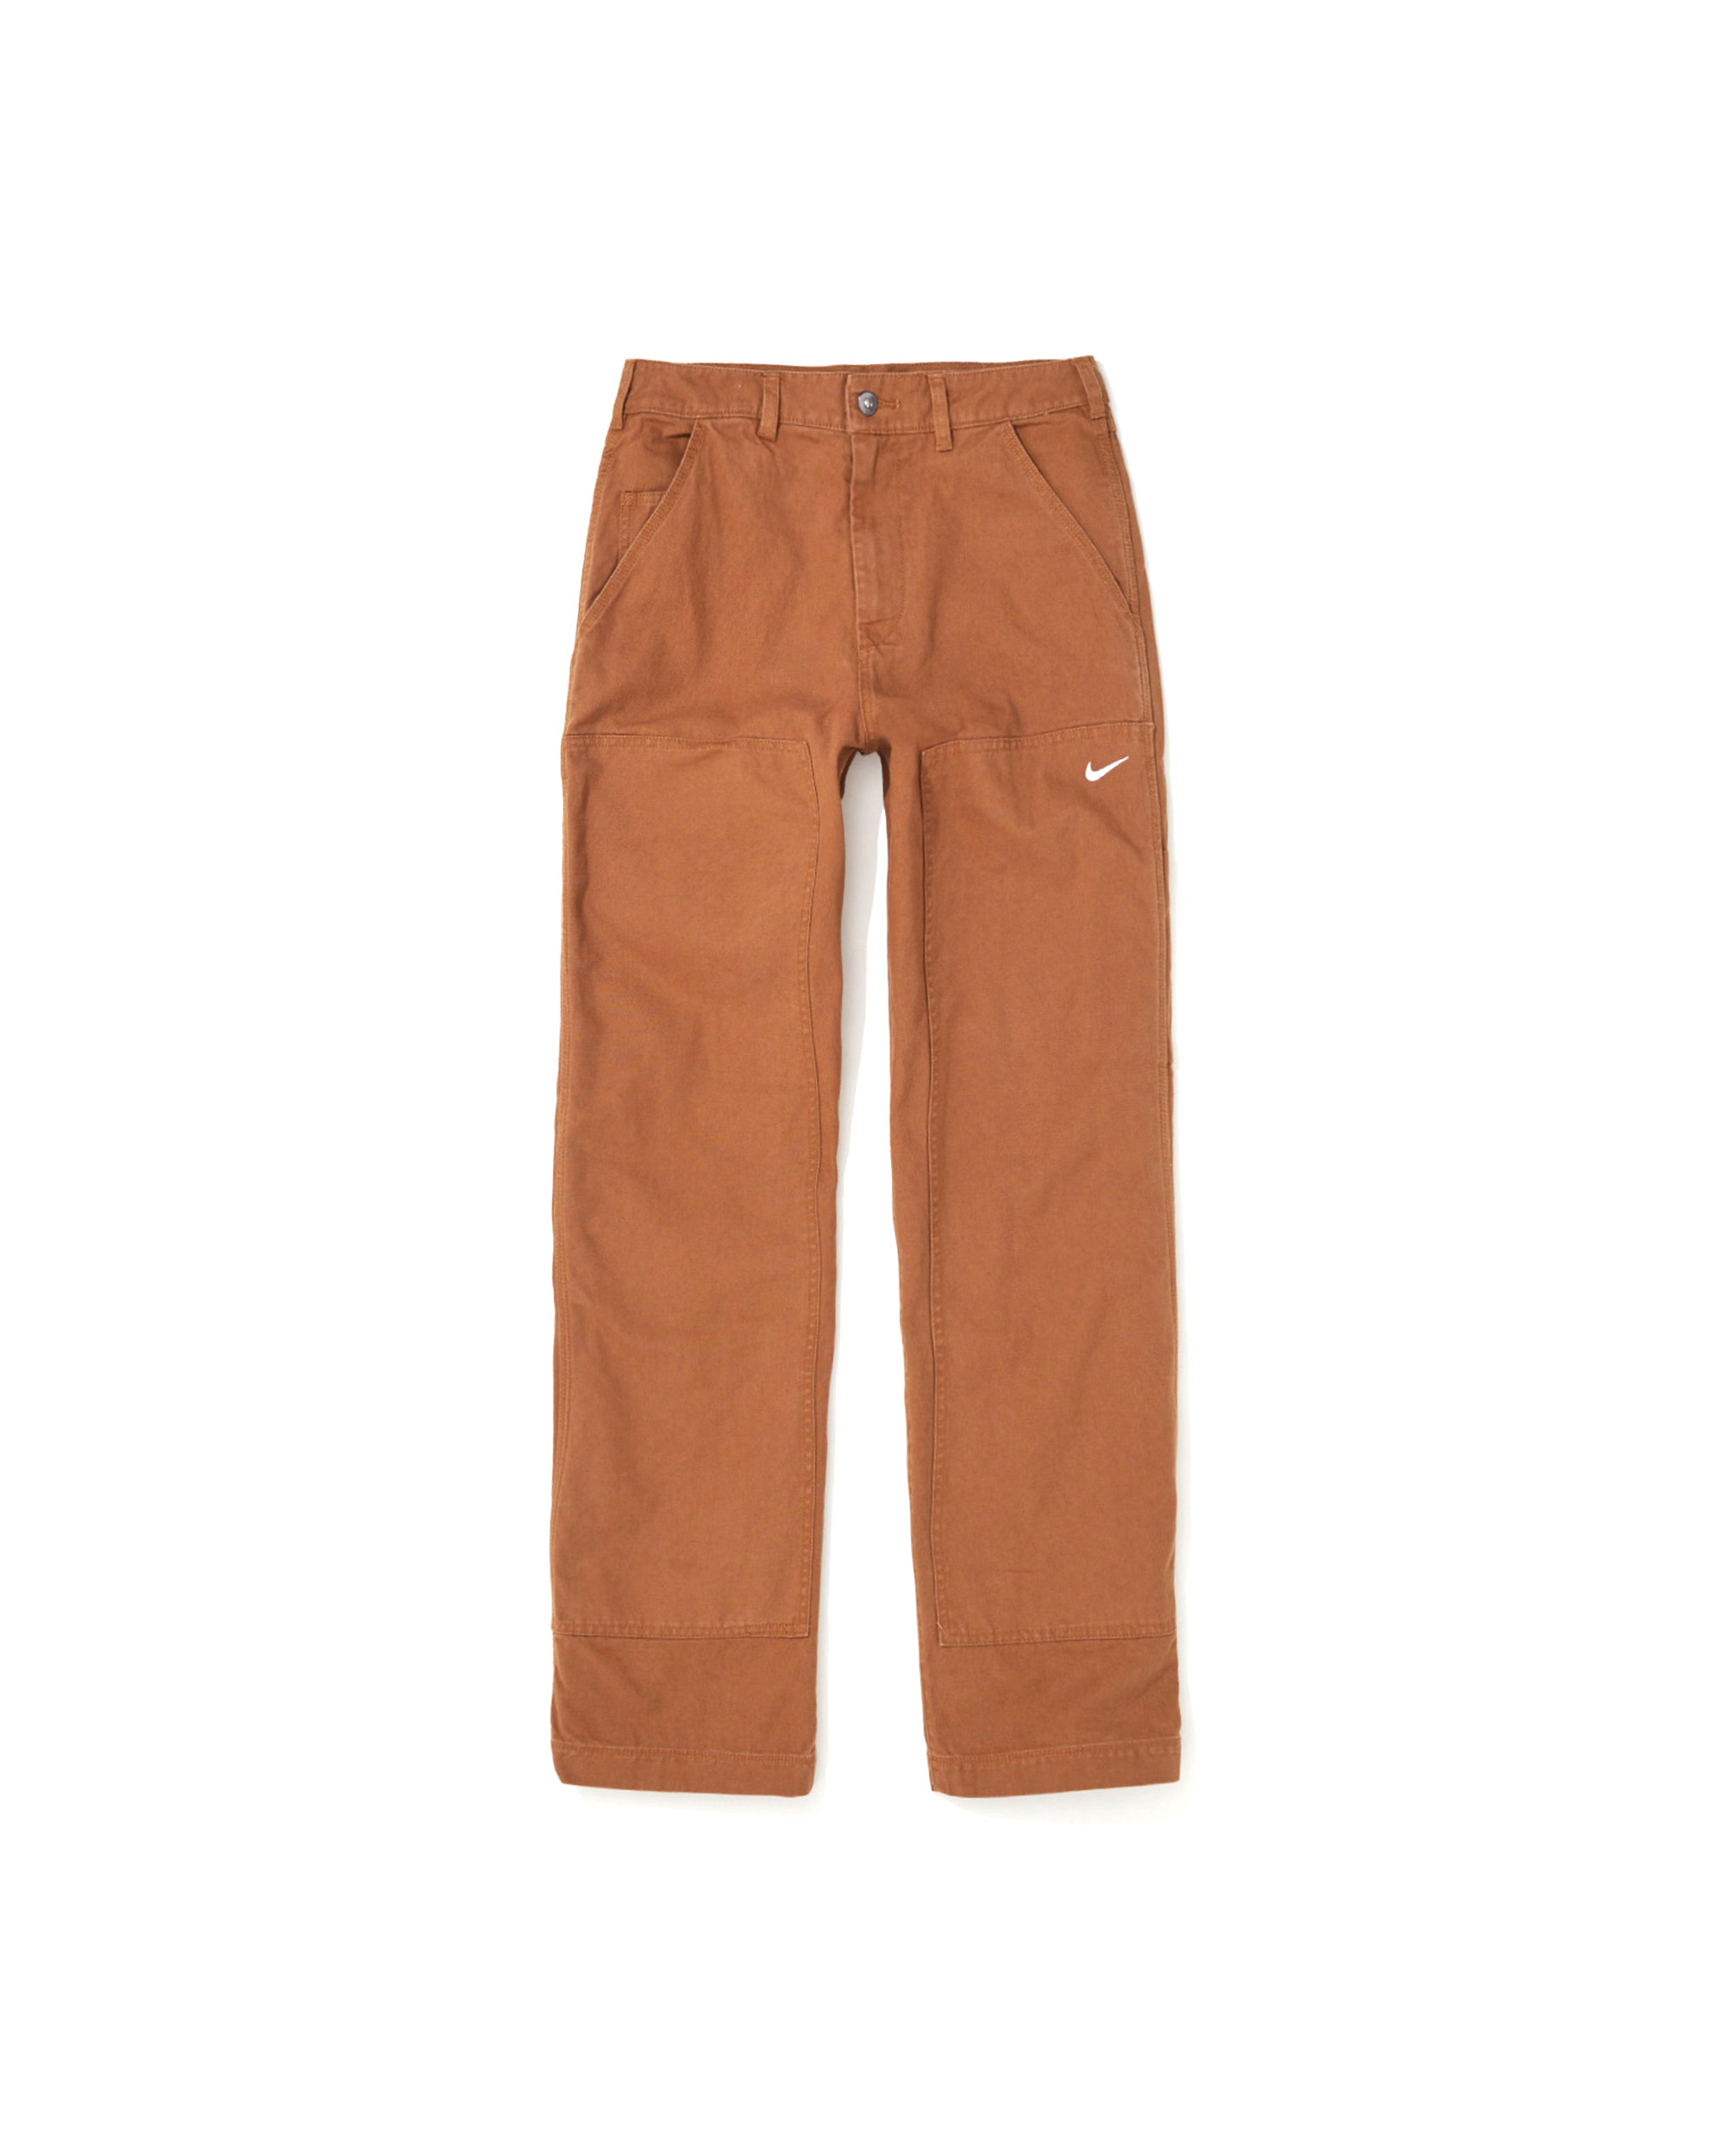 Life Double Panel Pant - Ale Brown / White